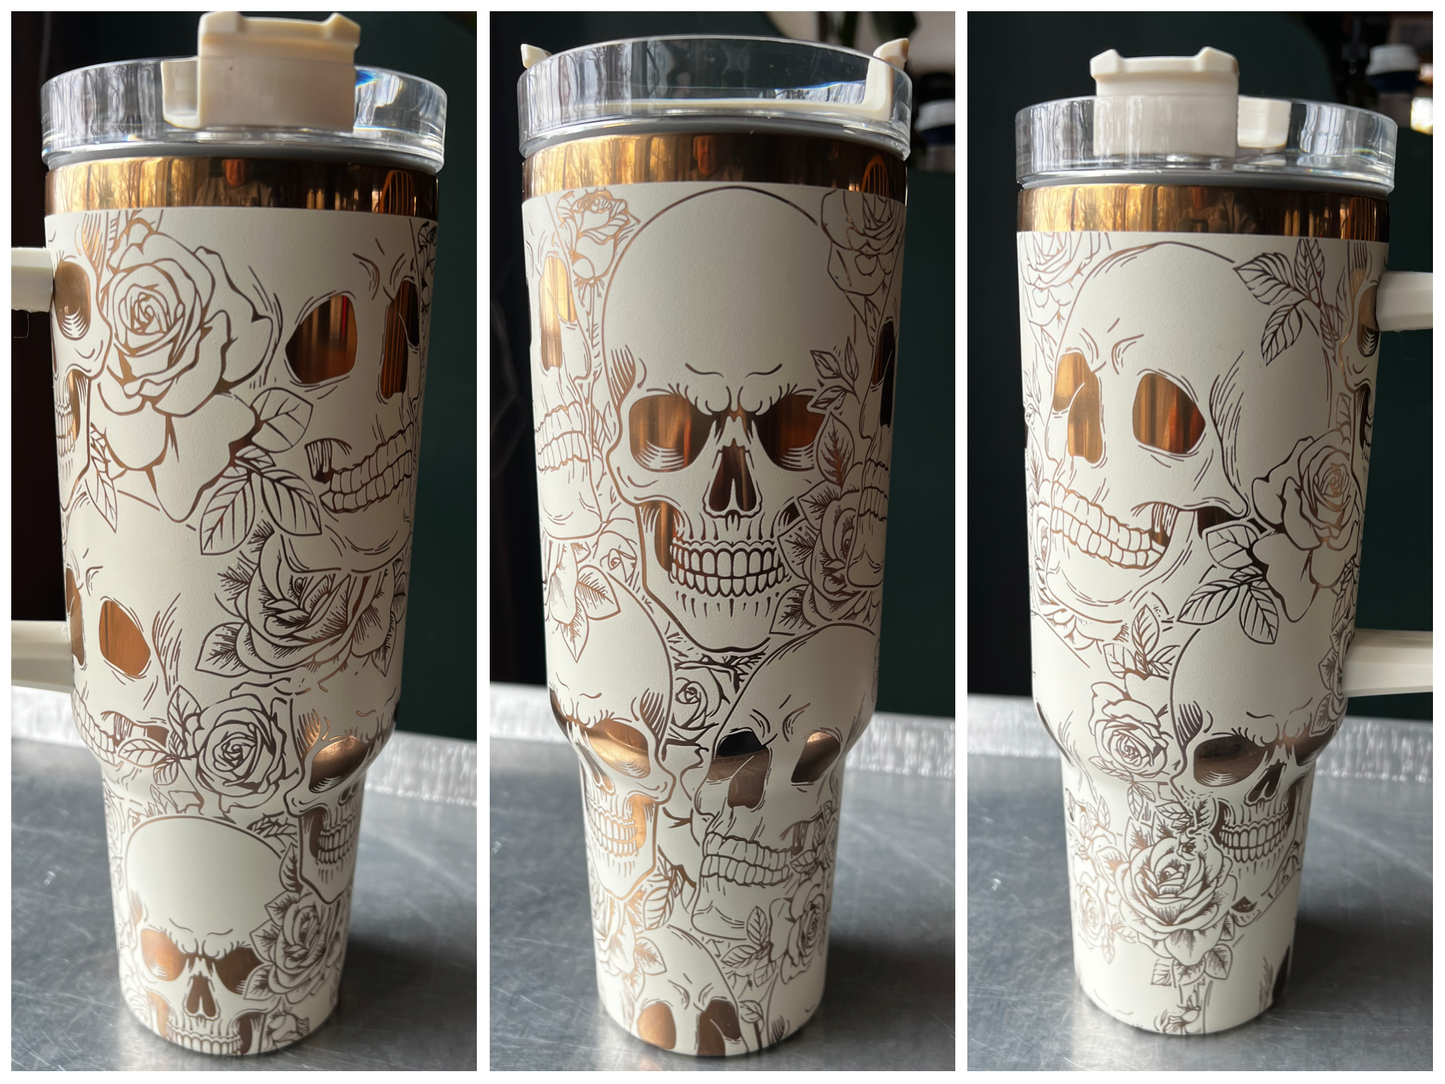 40 ounce engraved stainless steel tumbler Sculls